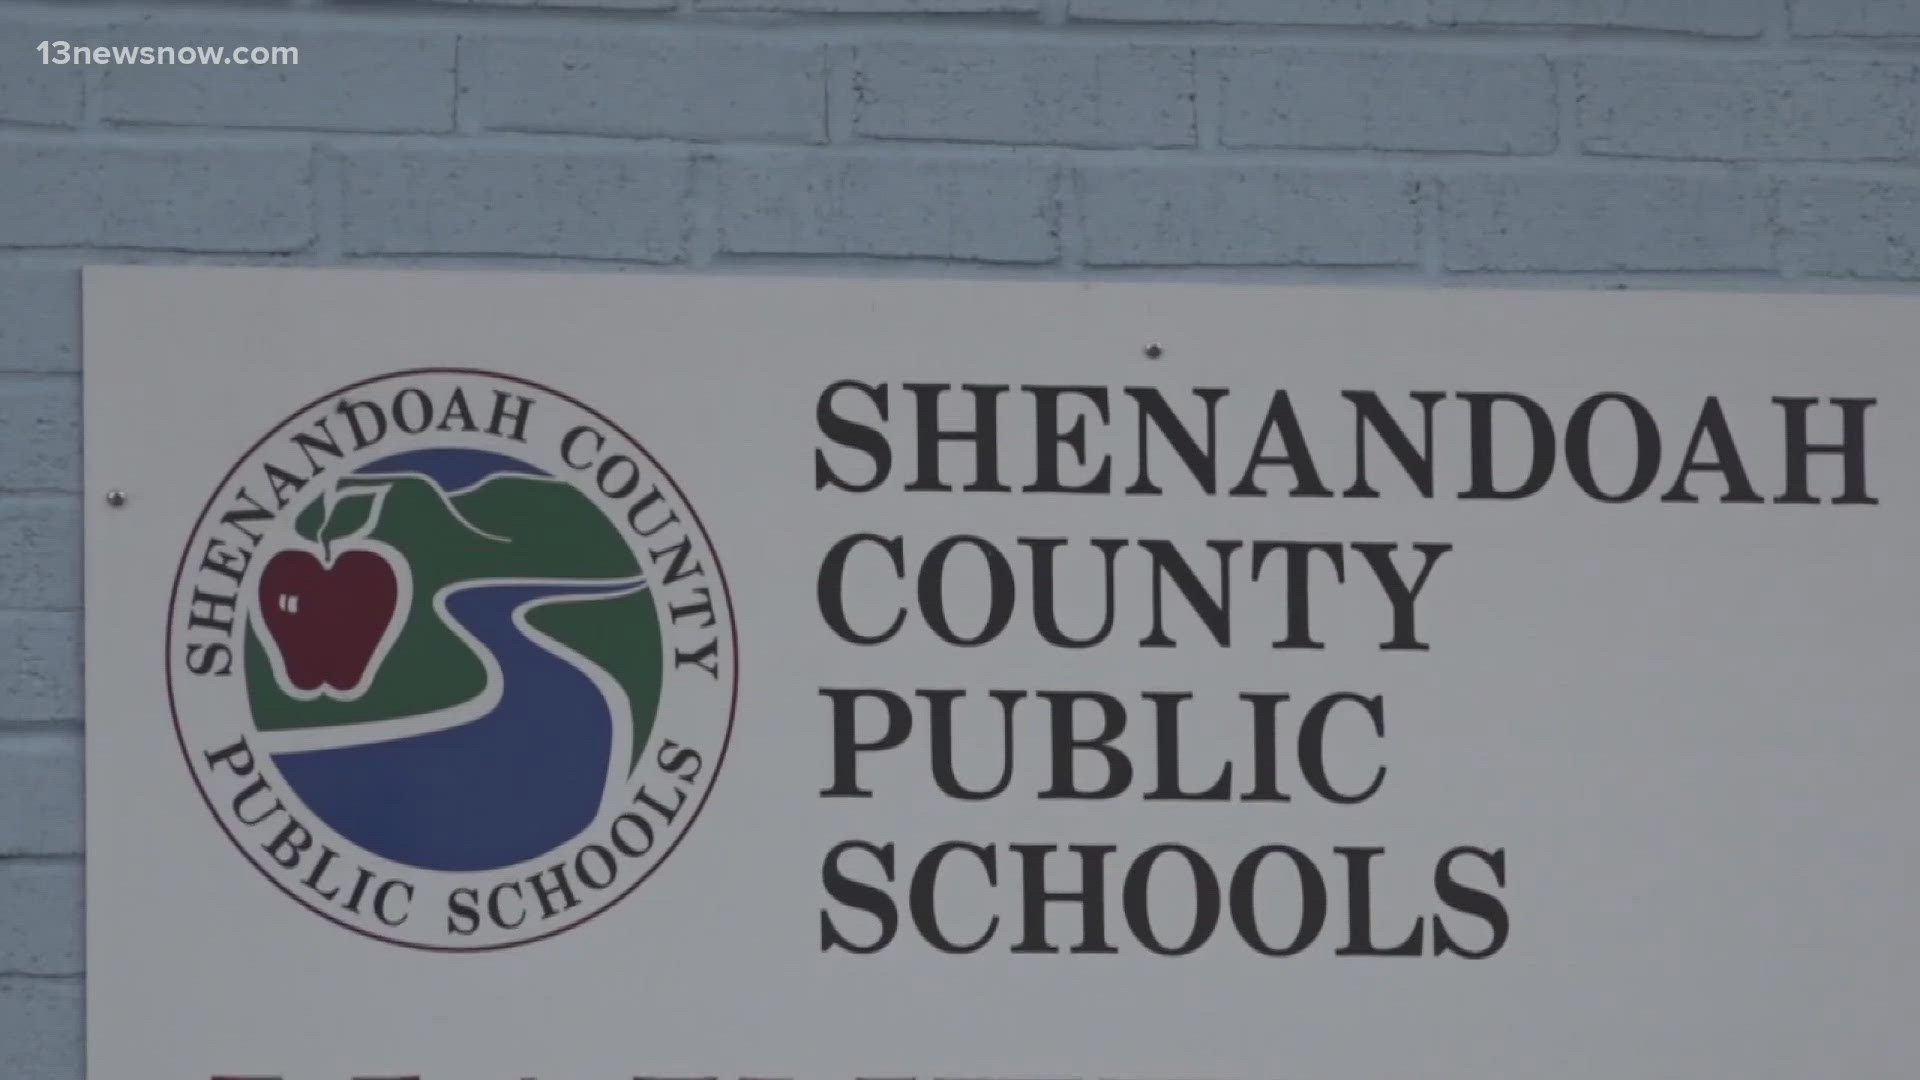 The Hampton Branch of NAACP is reacting after the Shenandoah County School board voted to restore the original names of two schools to honor Confederate leaders on F